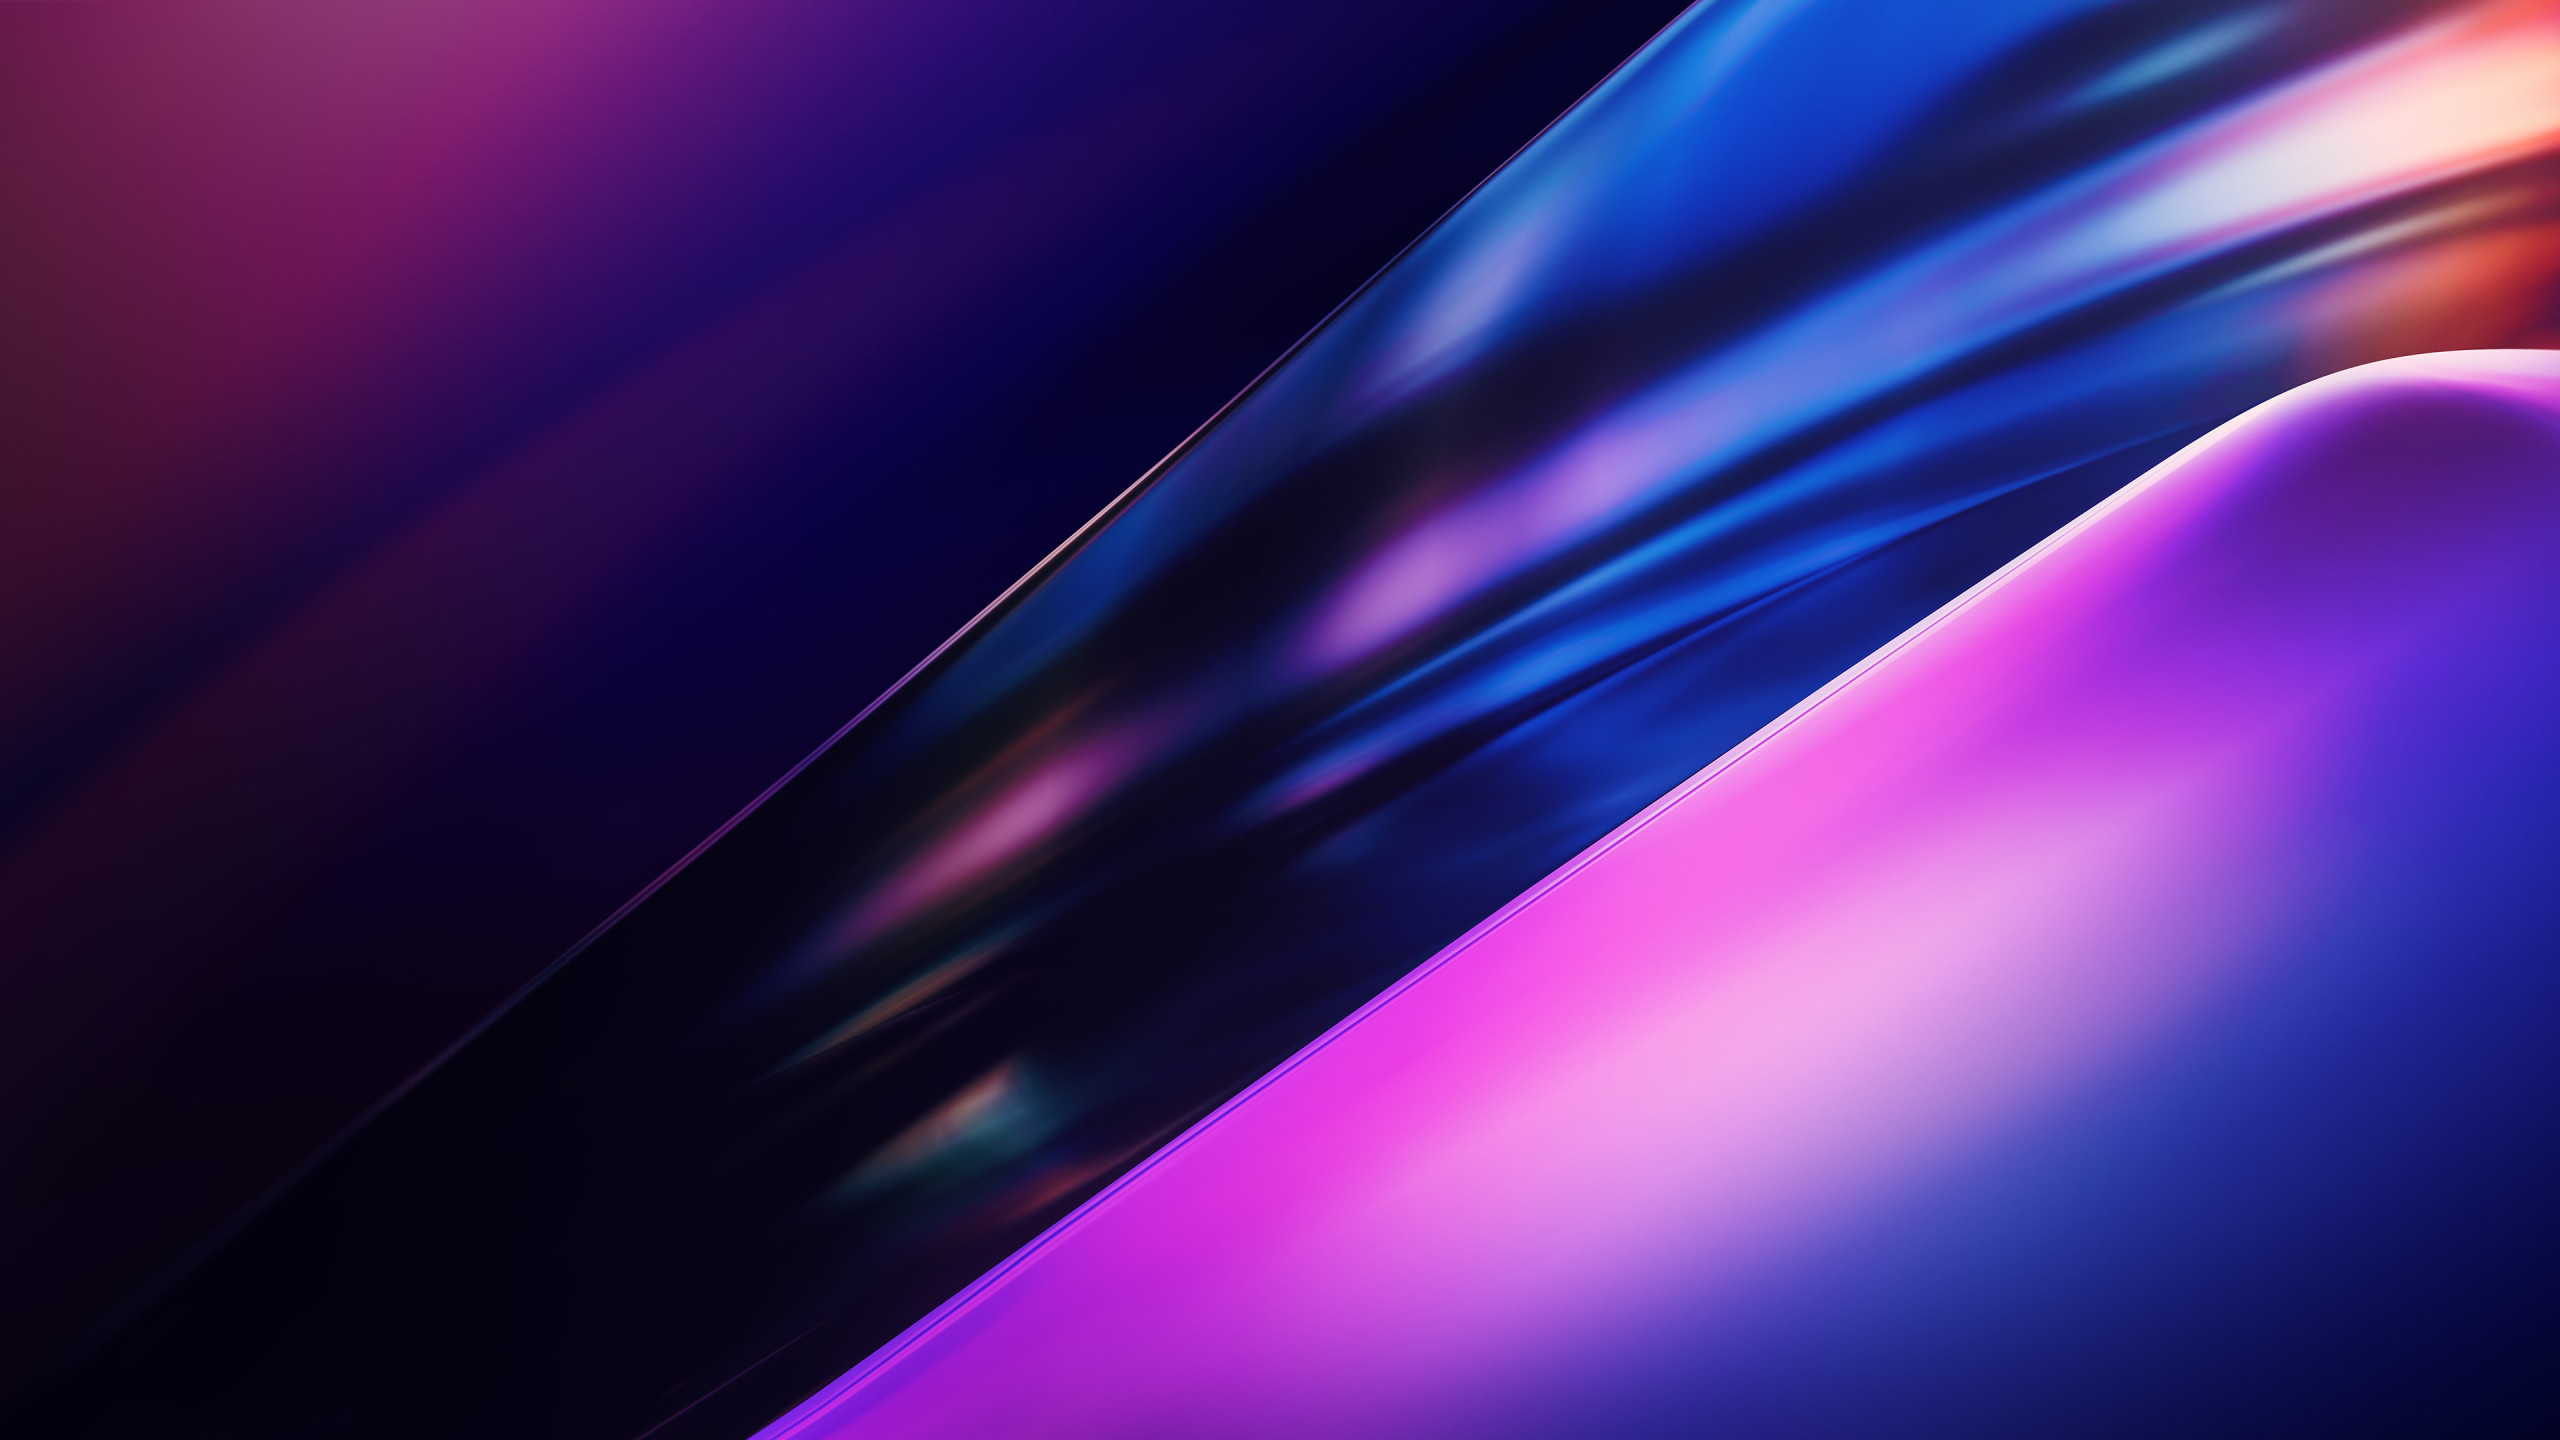 Wallpaper OnePlus 7T, abstract, colorful, 4K, OS #22190